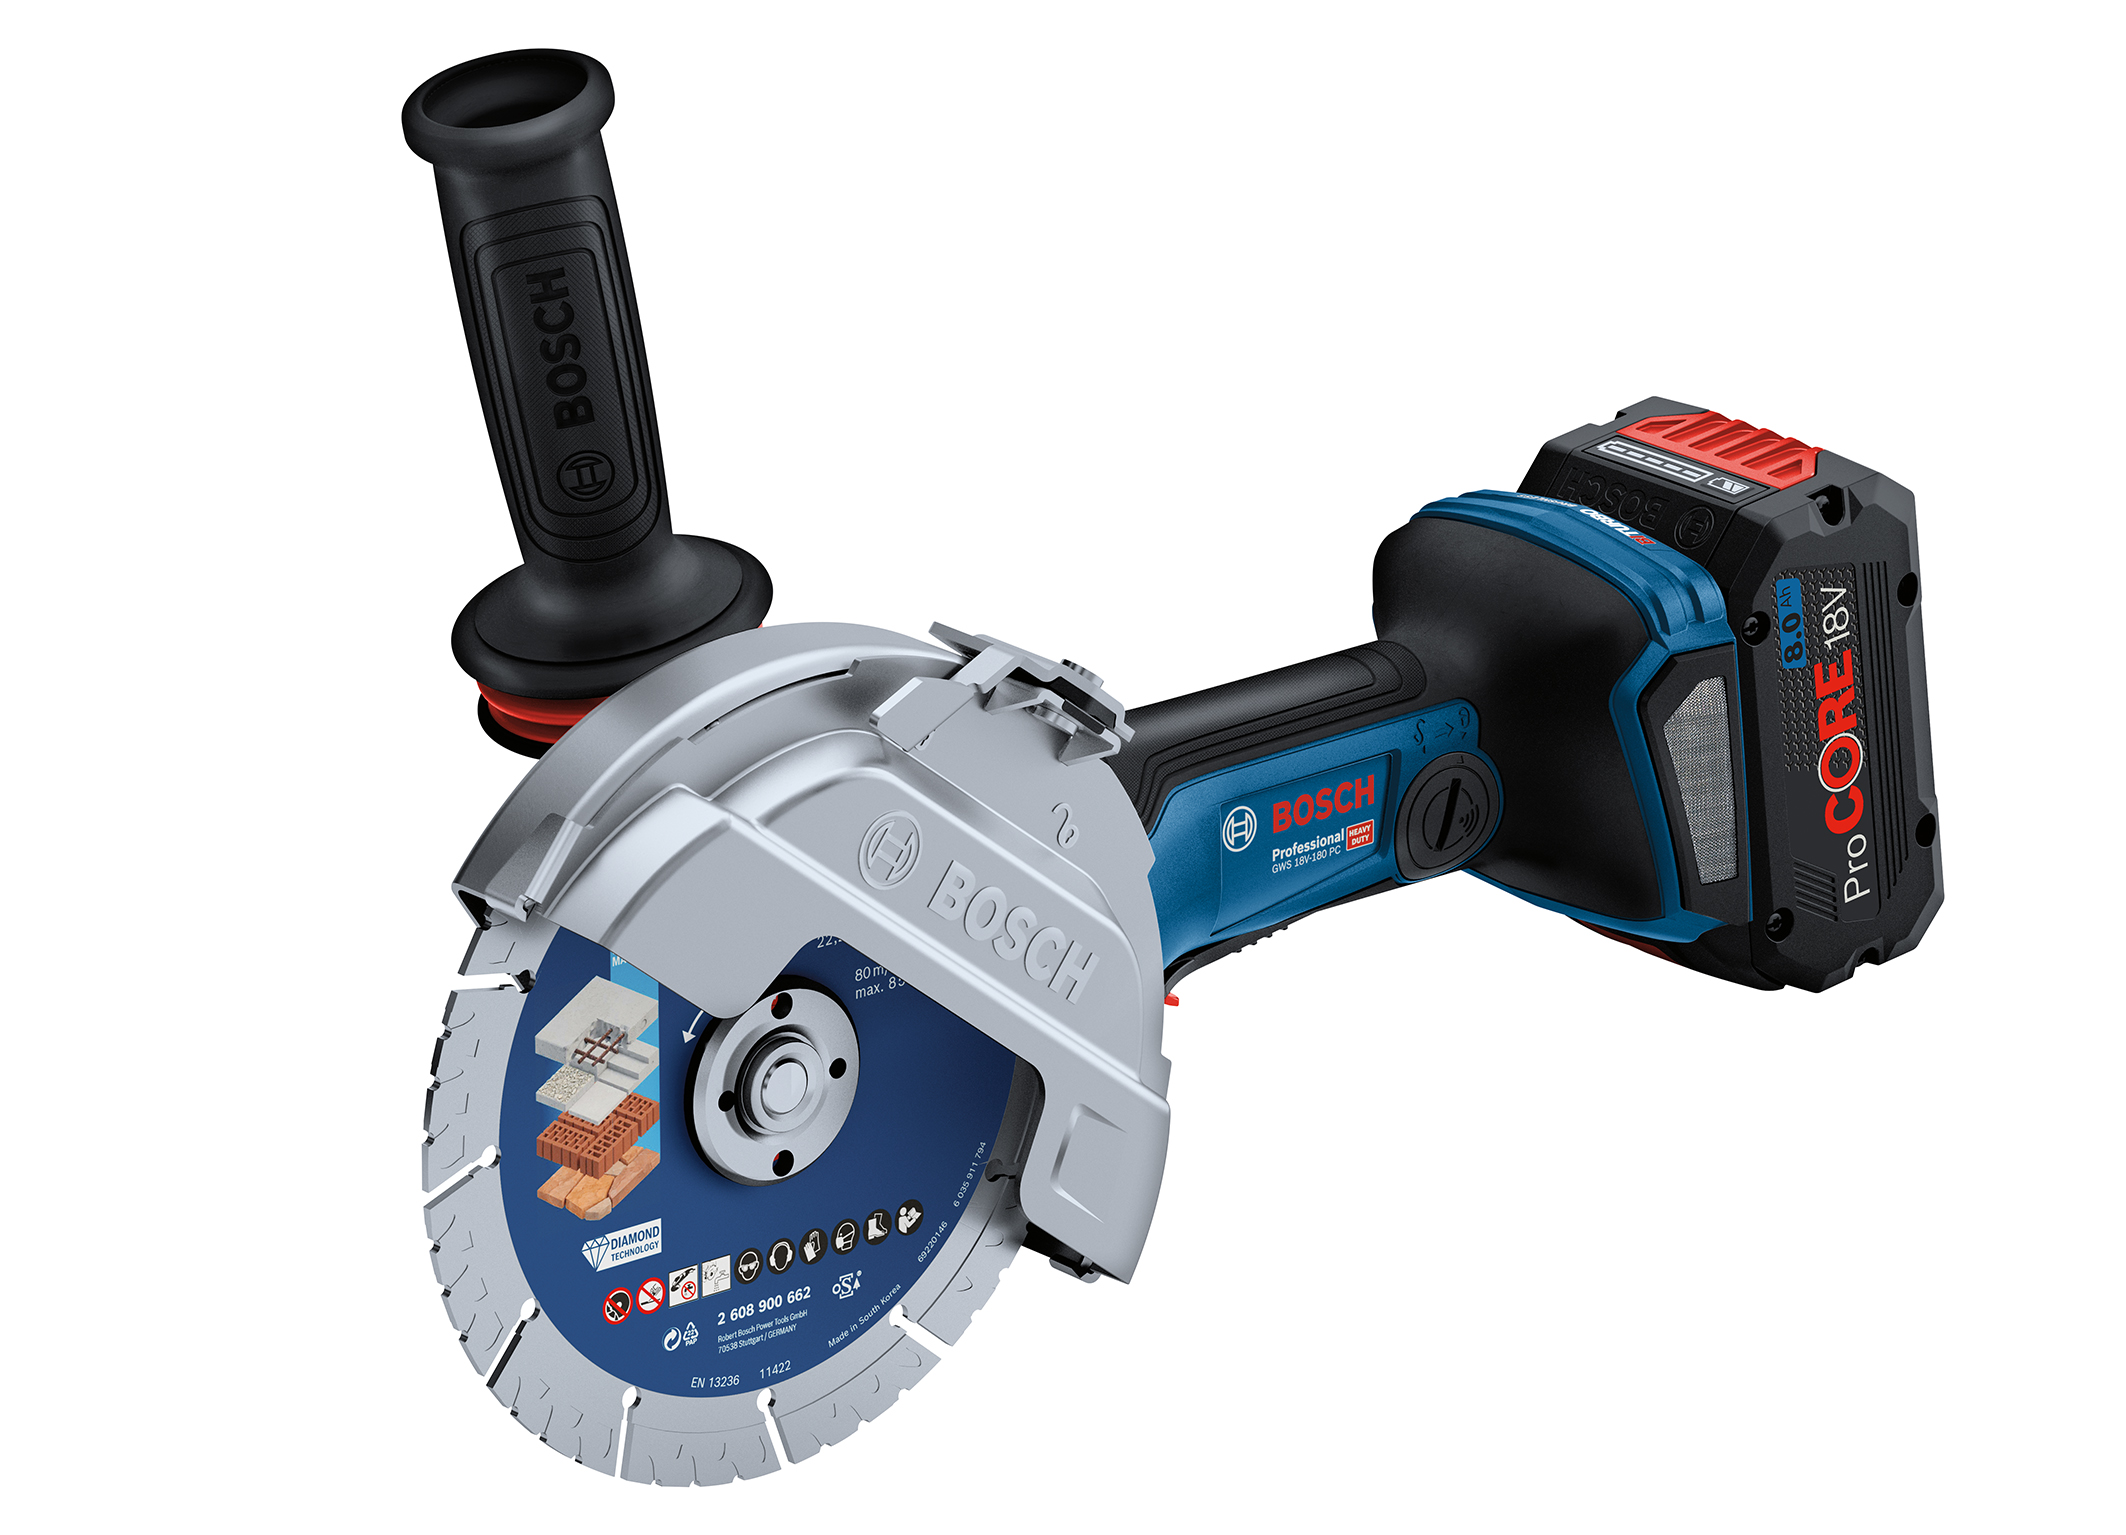 New in the Professional 18V System: Large Biturbo cordless angle grinder GWS 18V-180 PC Professional from Bosch